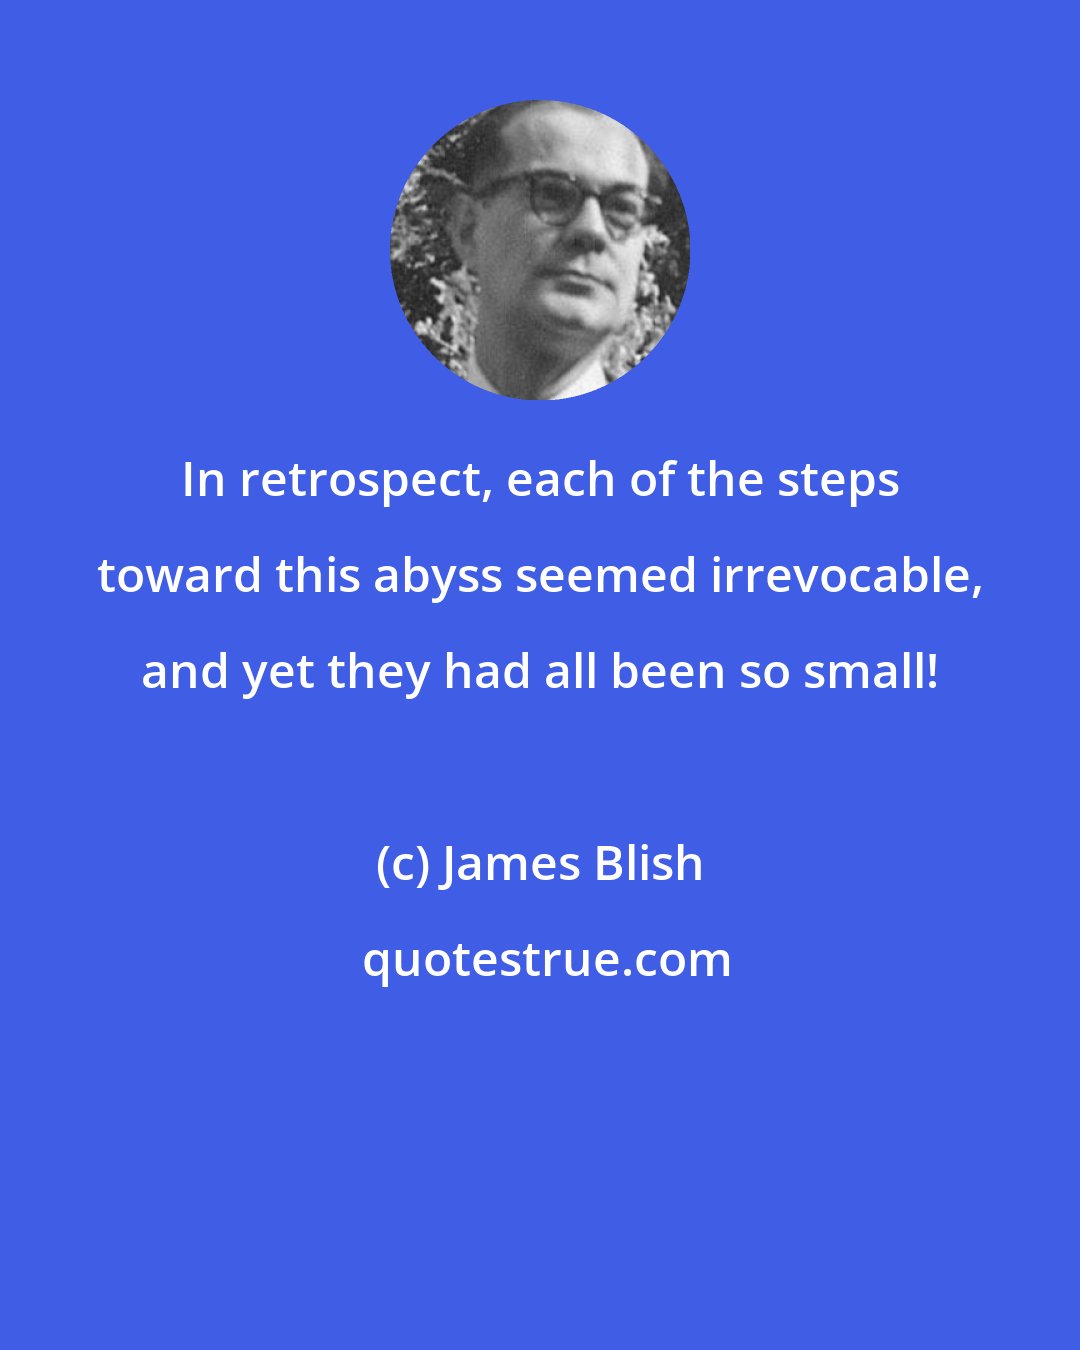 James Blish: In retrospect, each of the steps toward this abyss seemed irrevocable, and yet they had all been so small!